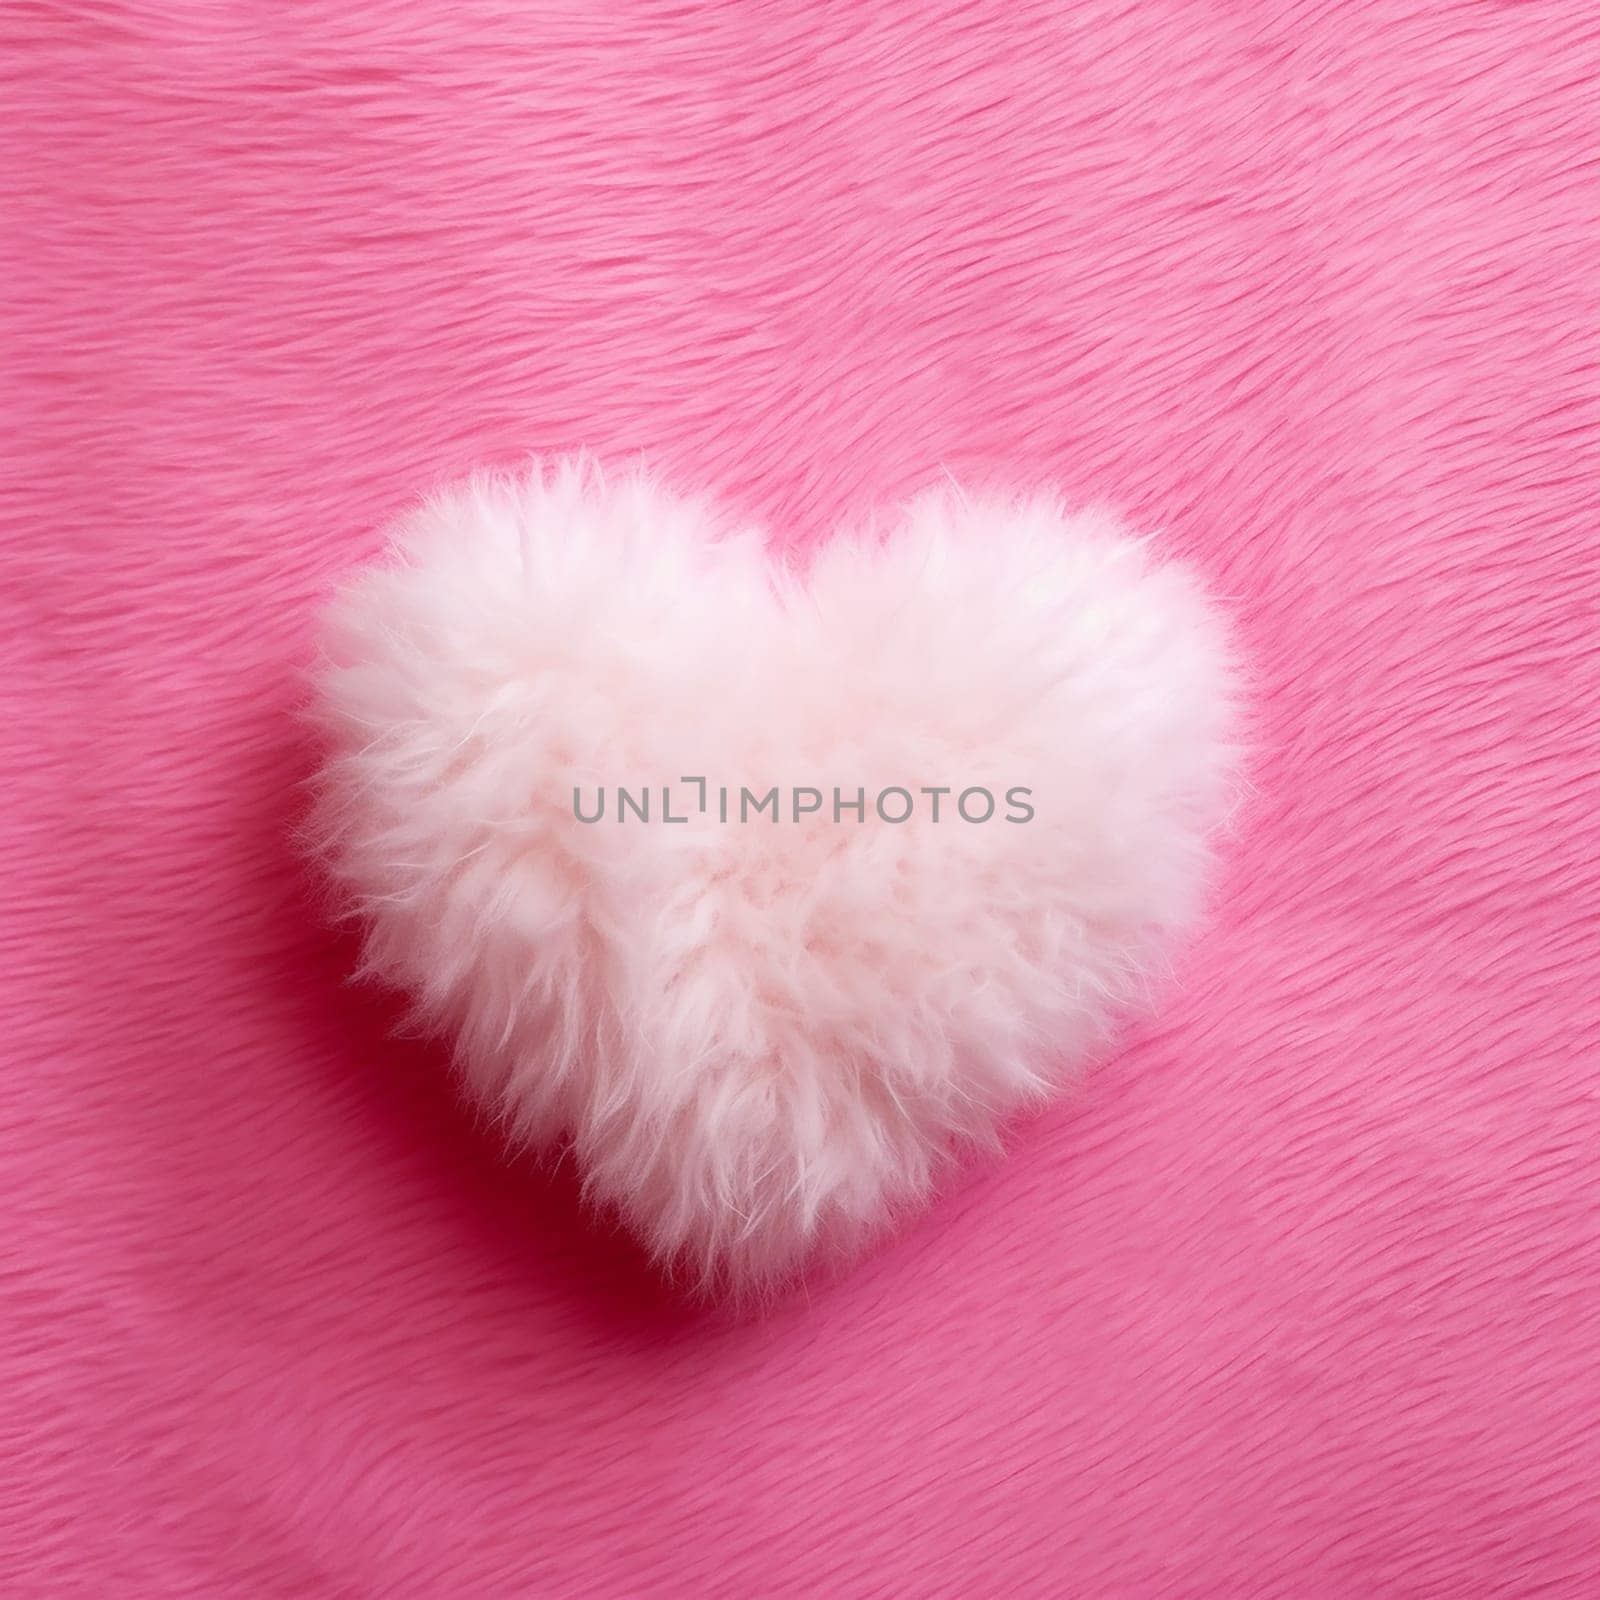 Fluffy white heart-shaped object on pink background by Hype2art